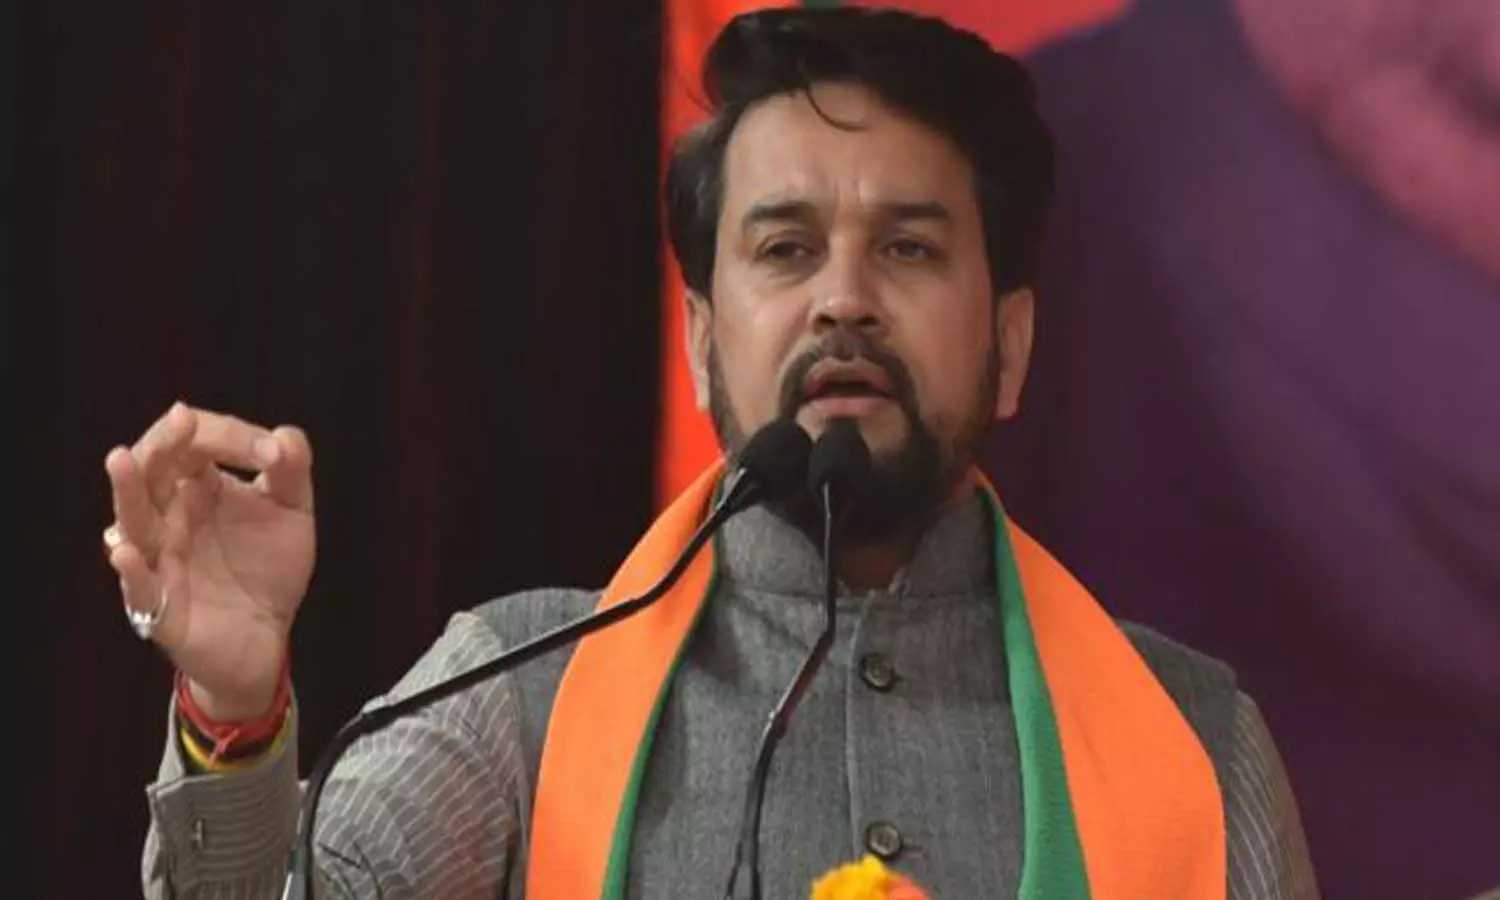 Anurag Thakur in Kolkata: In contrast to Mamata's government, Anurag Thakur arrived in Kolkata following the Sandeshkhalikand. What is the Union Minister's response, if he is to remain anonymous, to this?